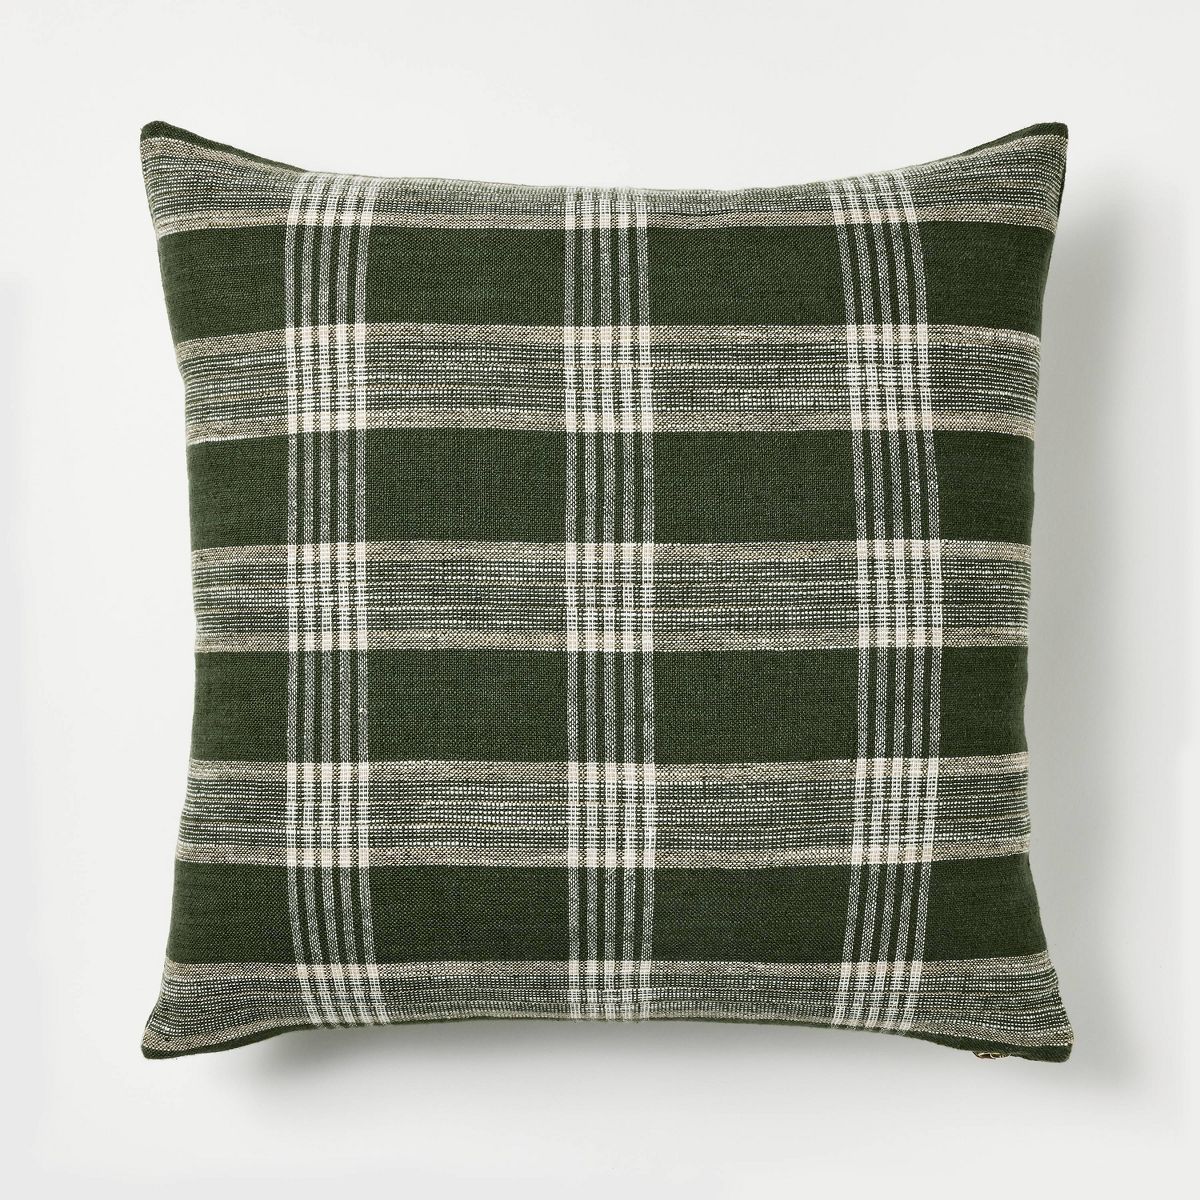 Woven Plaid Square Throw Pillow with Zipper Pull Green - Threshold™ designed with Studio McGee | Target